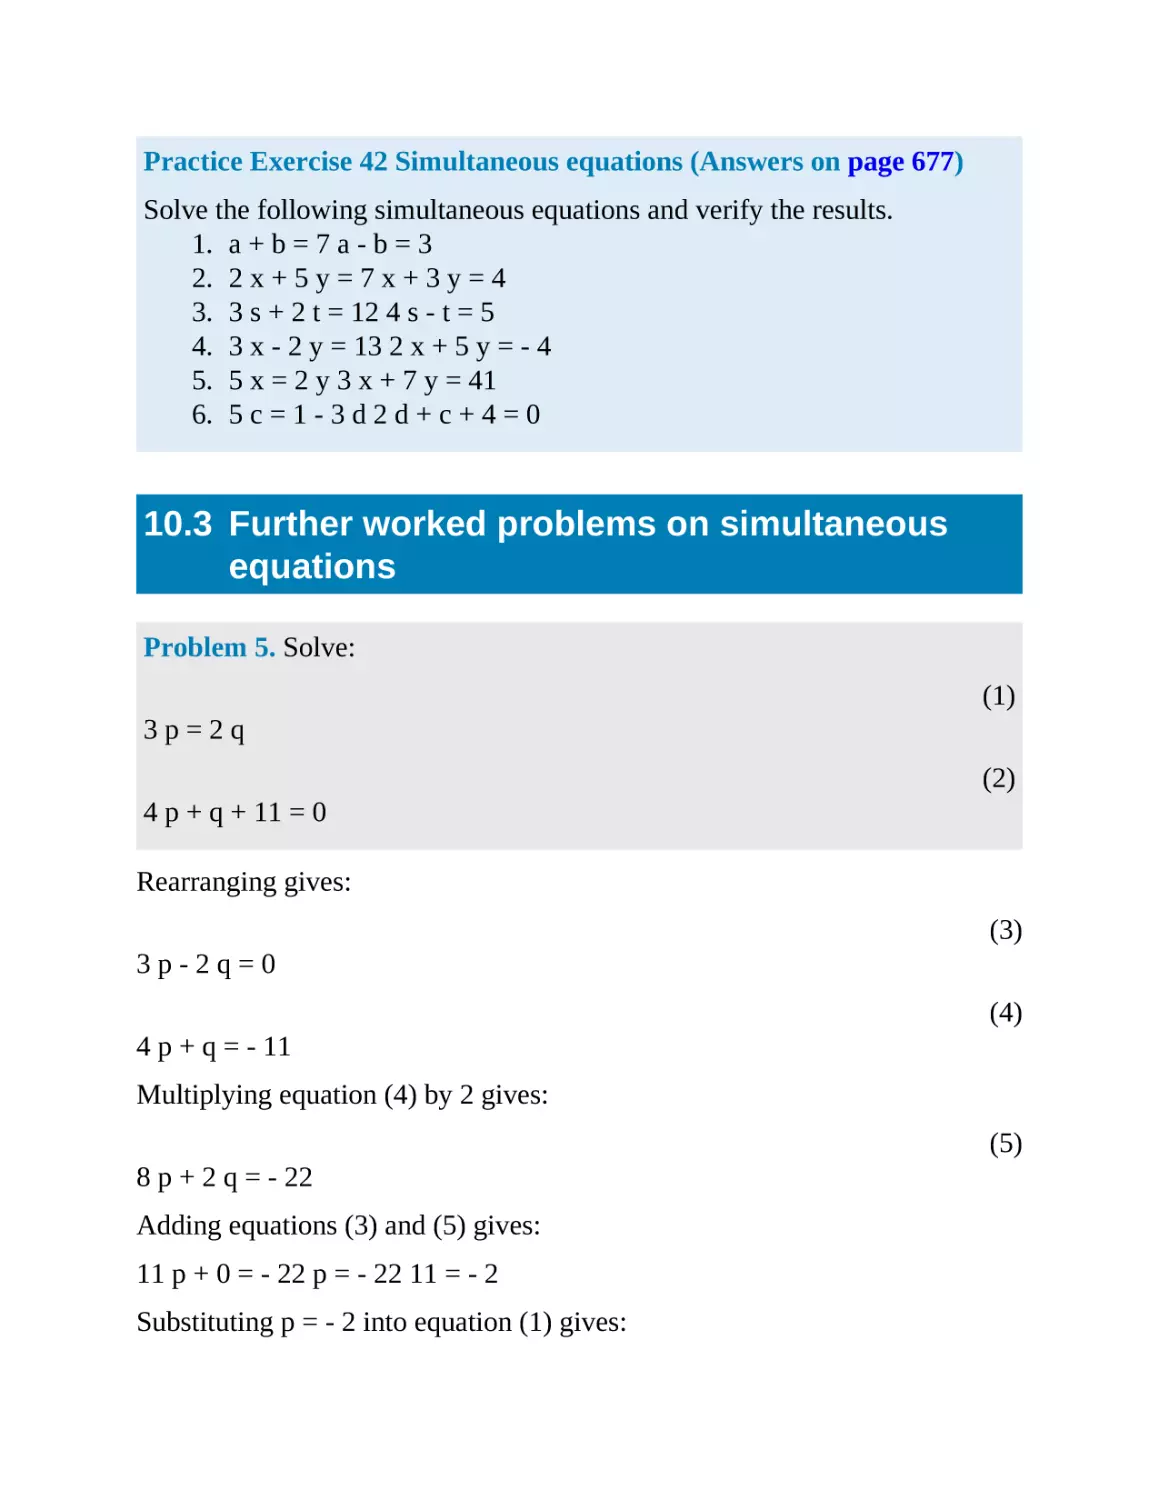 10.3 Further worked problems on simultaneous equations